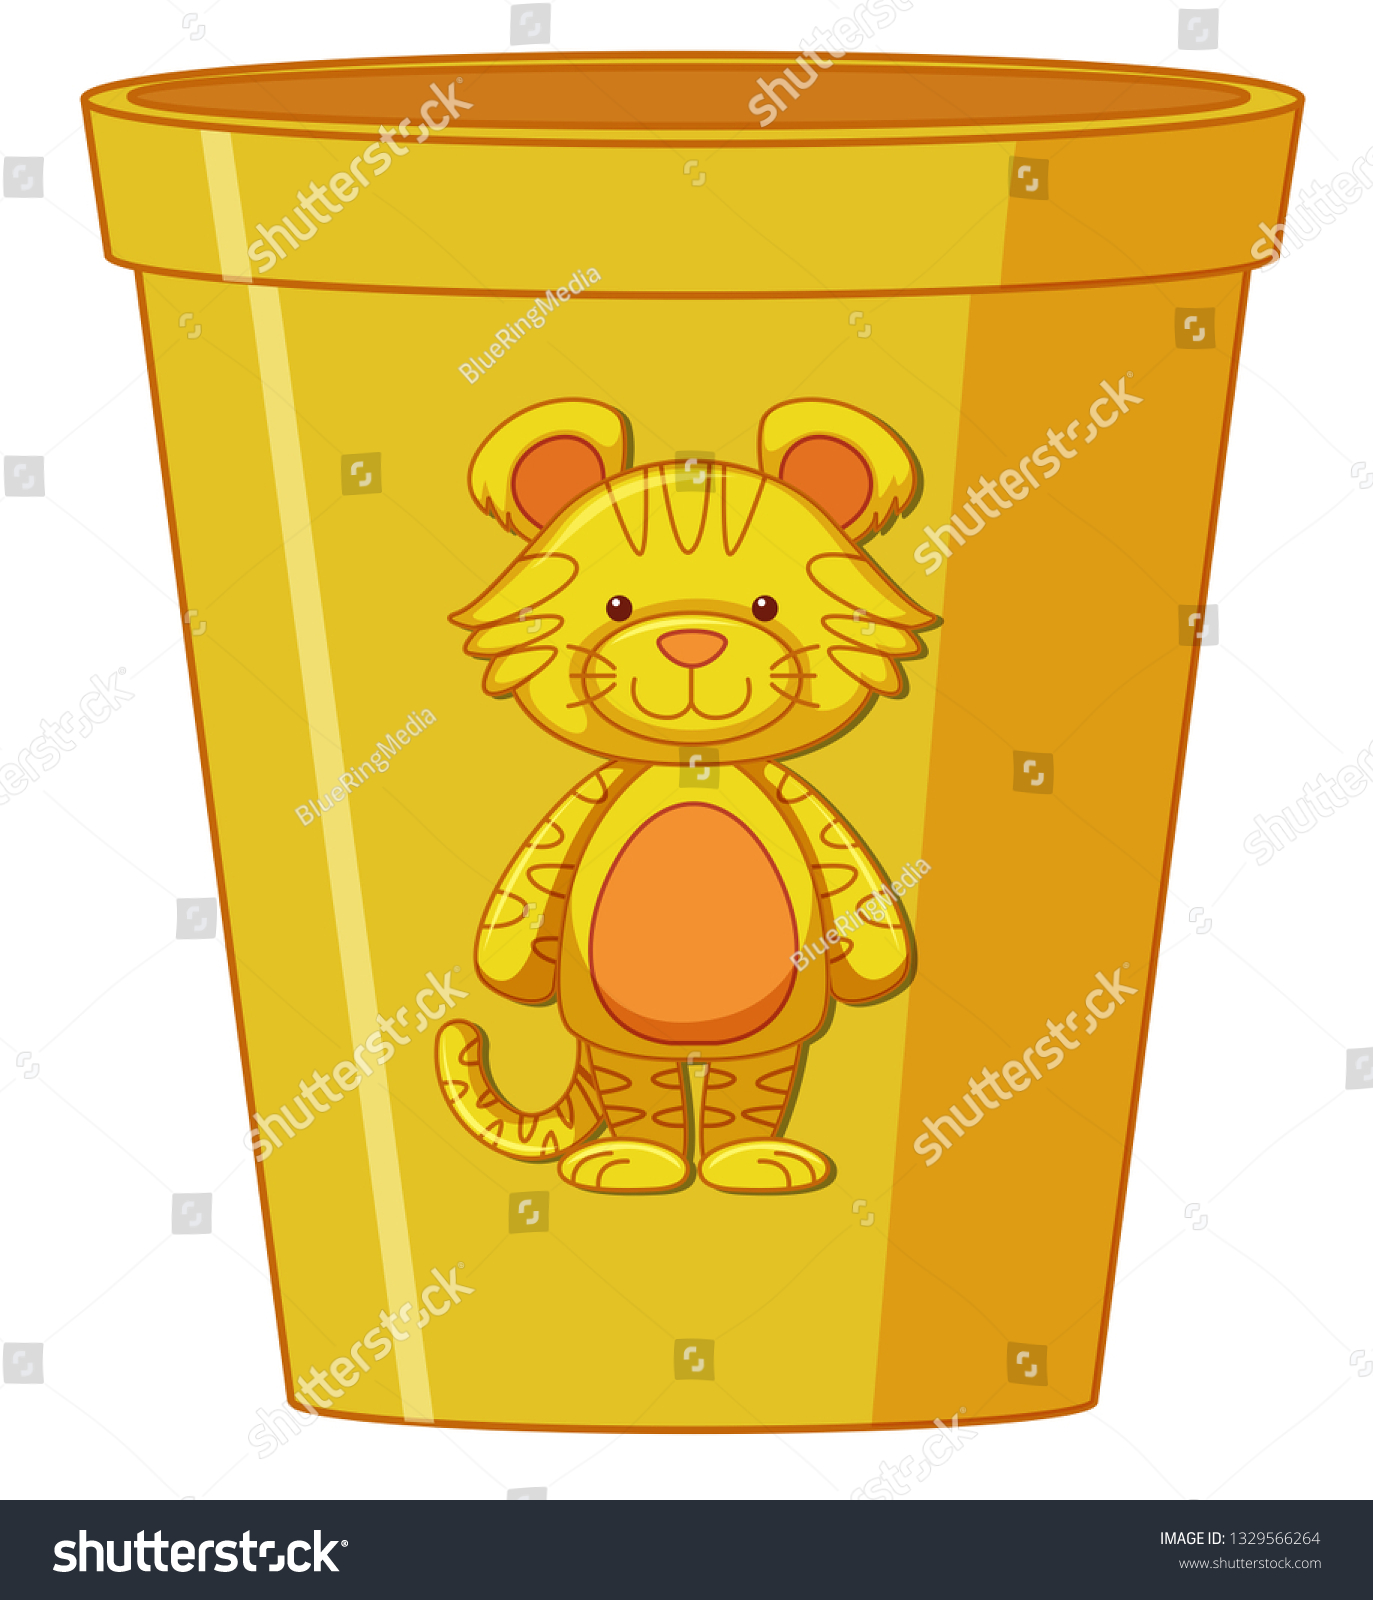 Download Yellow Plastic Cup Illustration Stock Vector Royalty Free 1329566264 PSD Mockup Templates